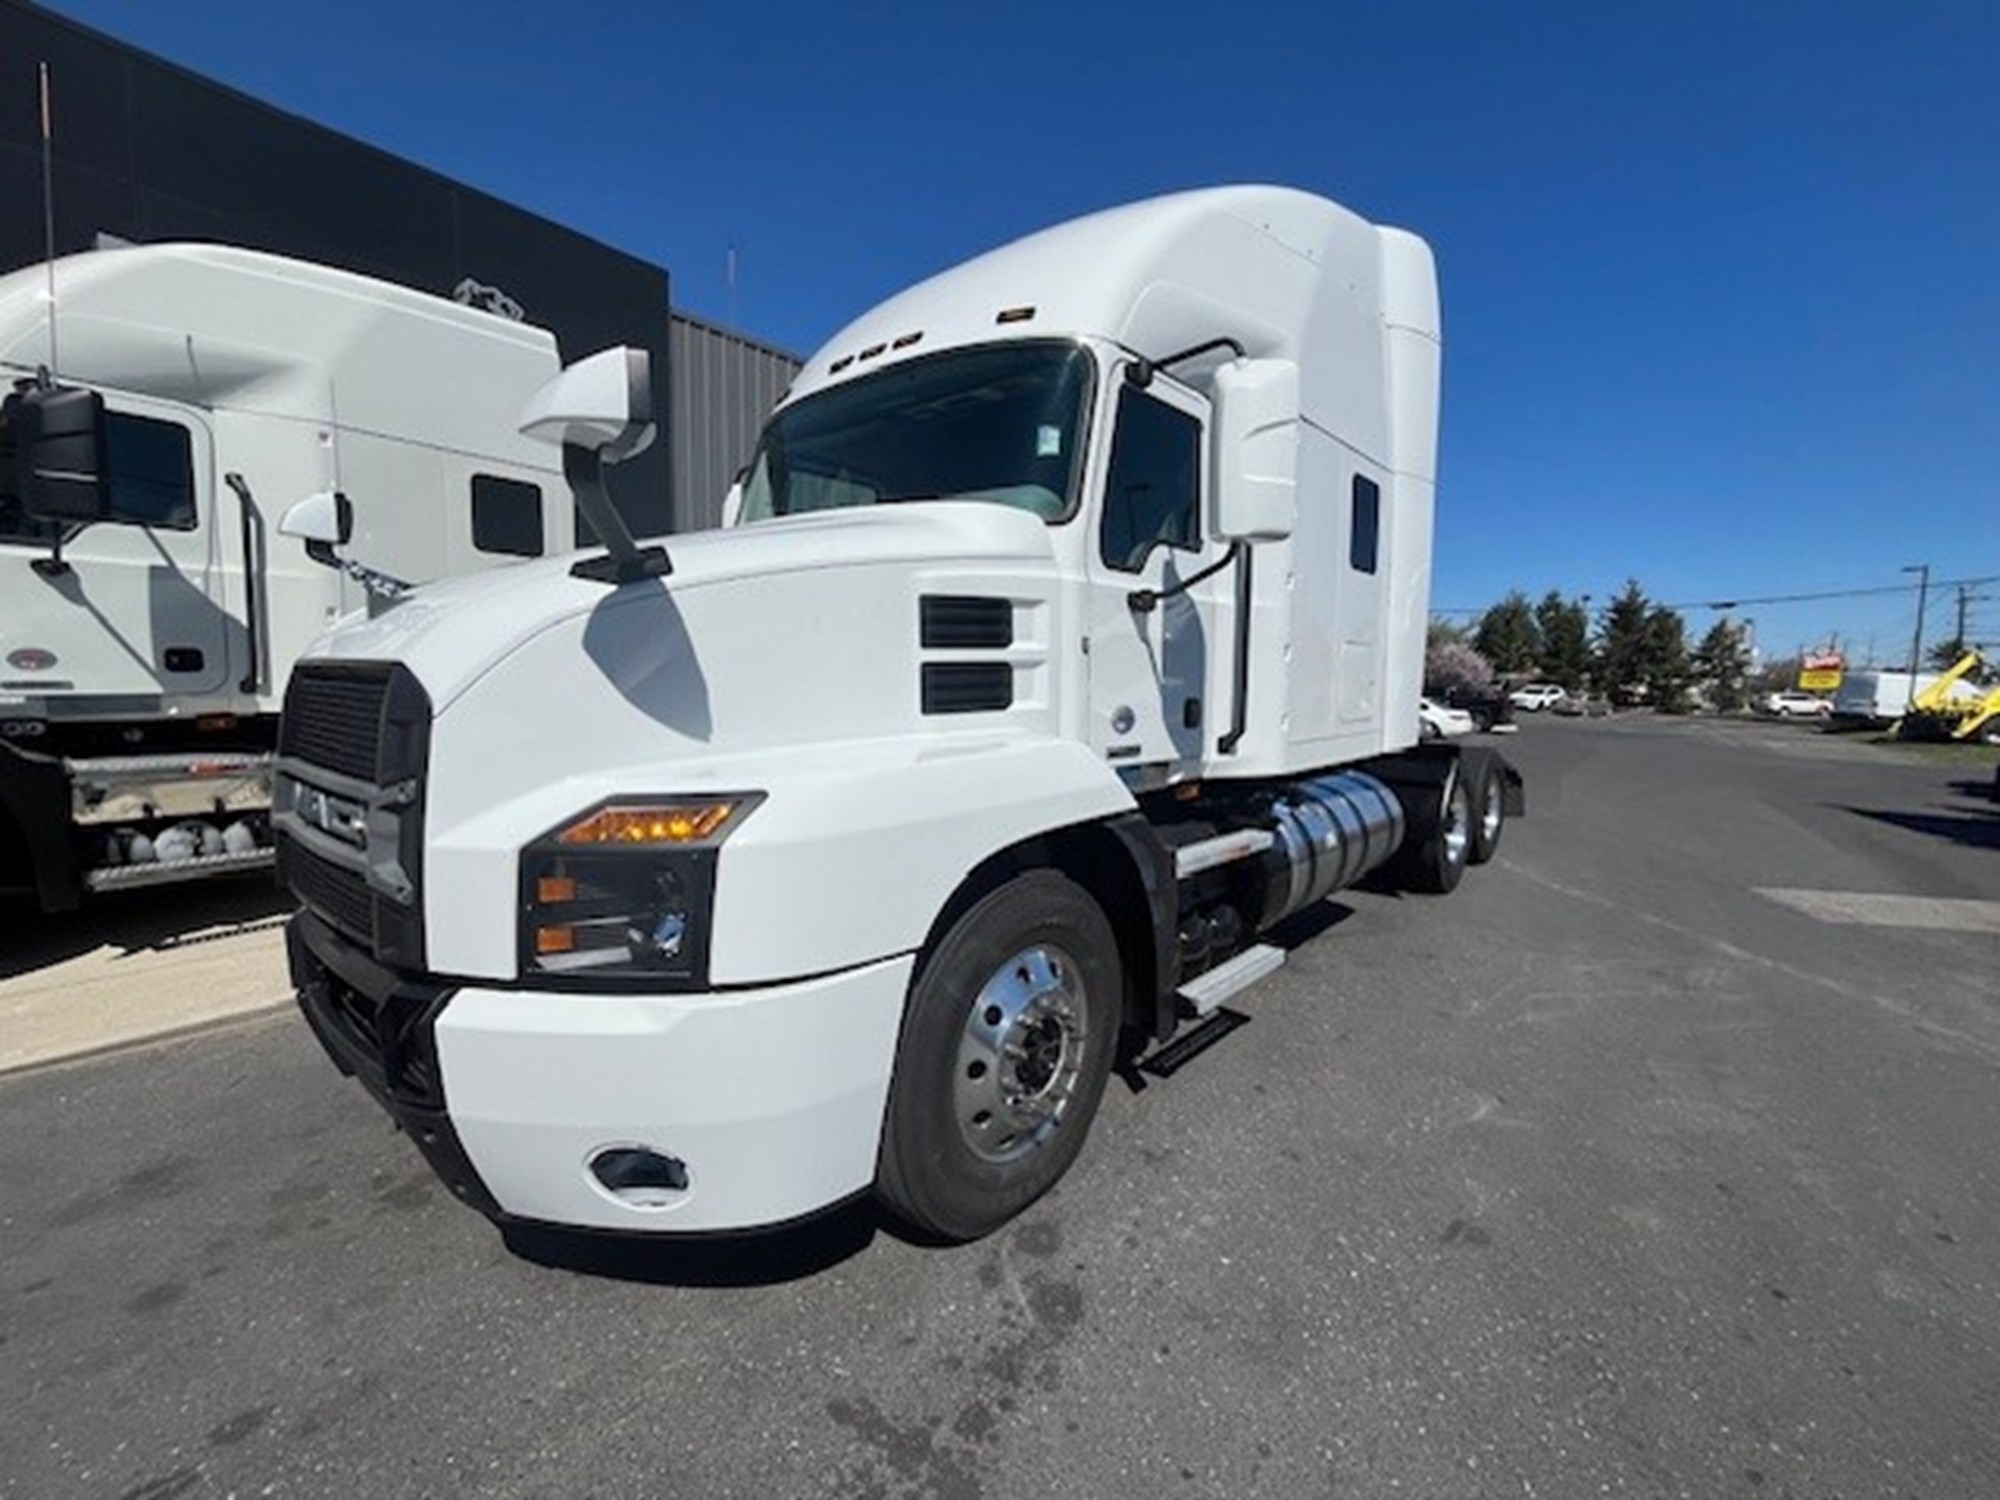 Used Truck Inventory - 1001662 01 - 86